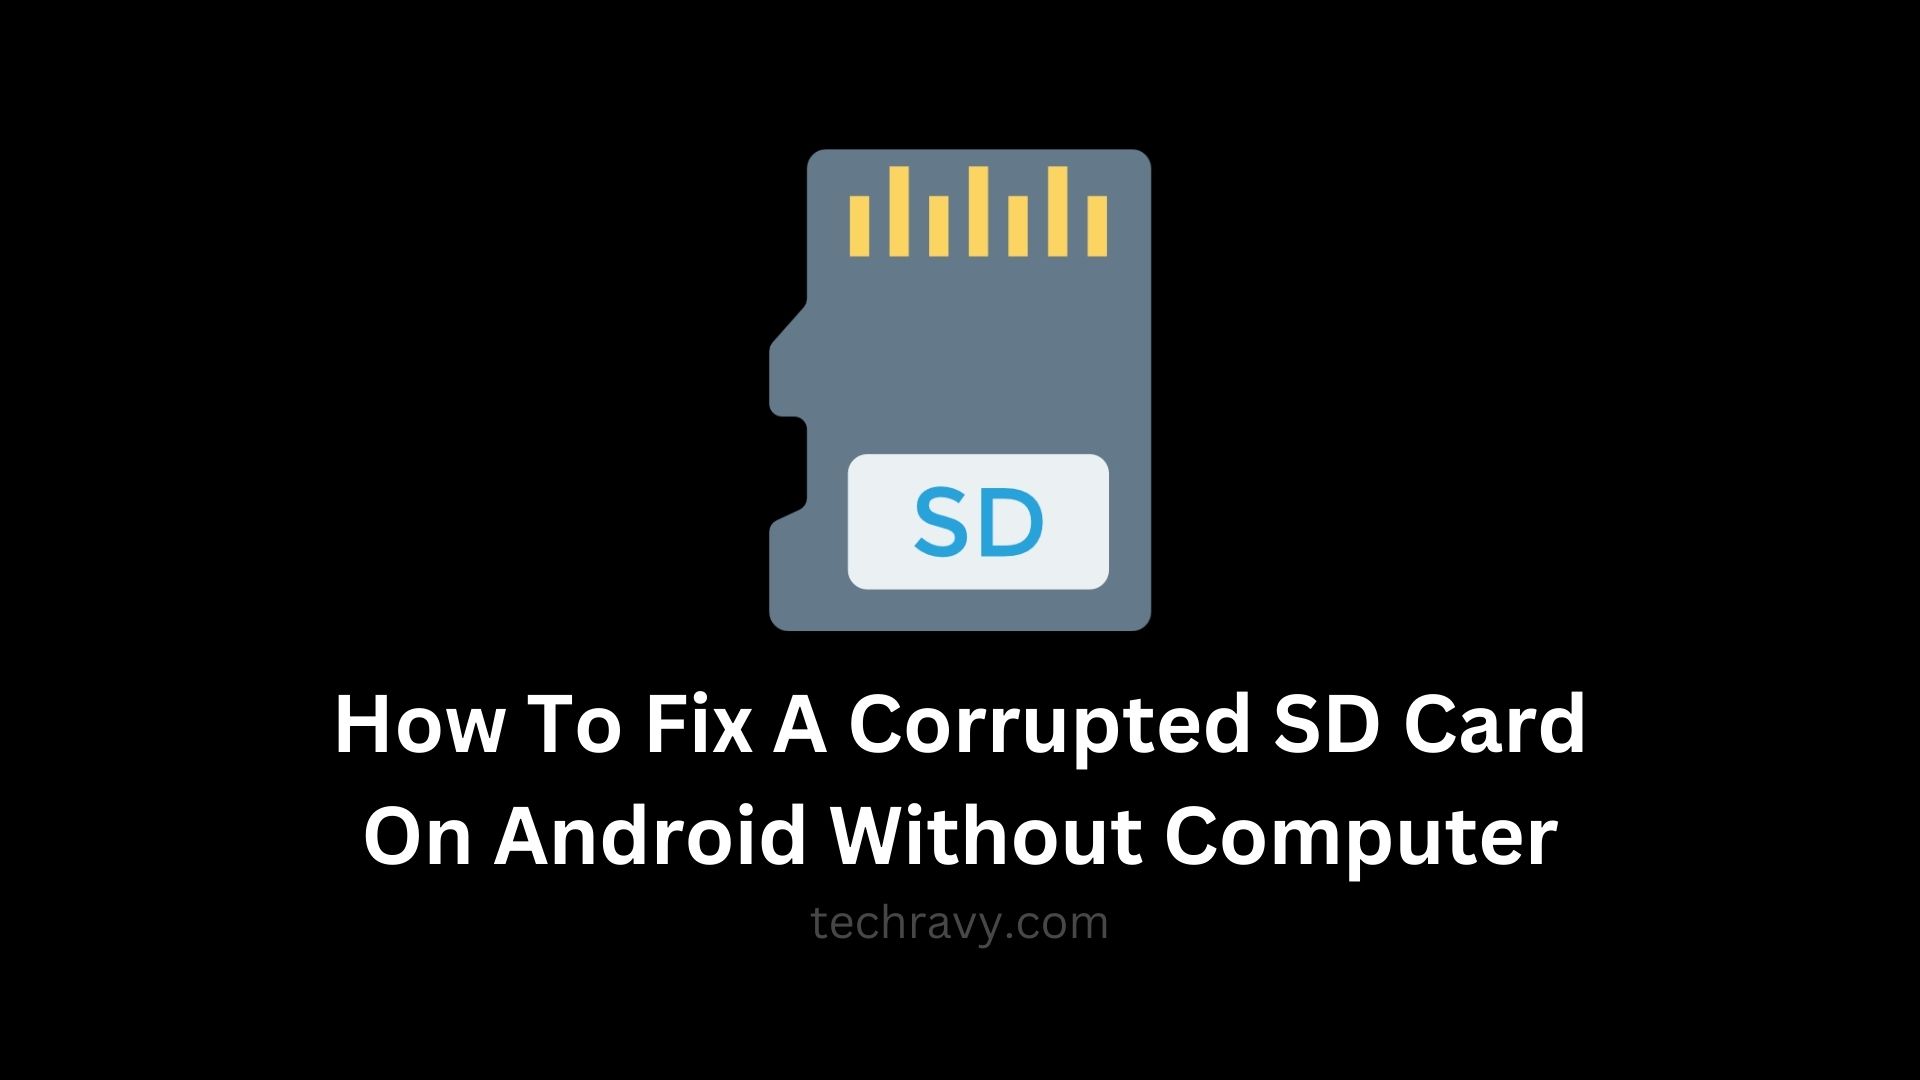 How To Fix A Corrupted SD Card On Android Without Computer